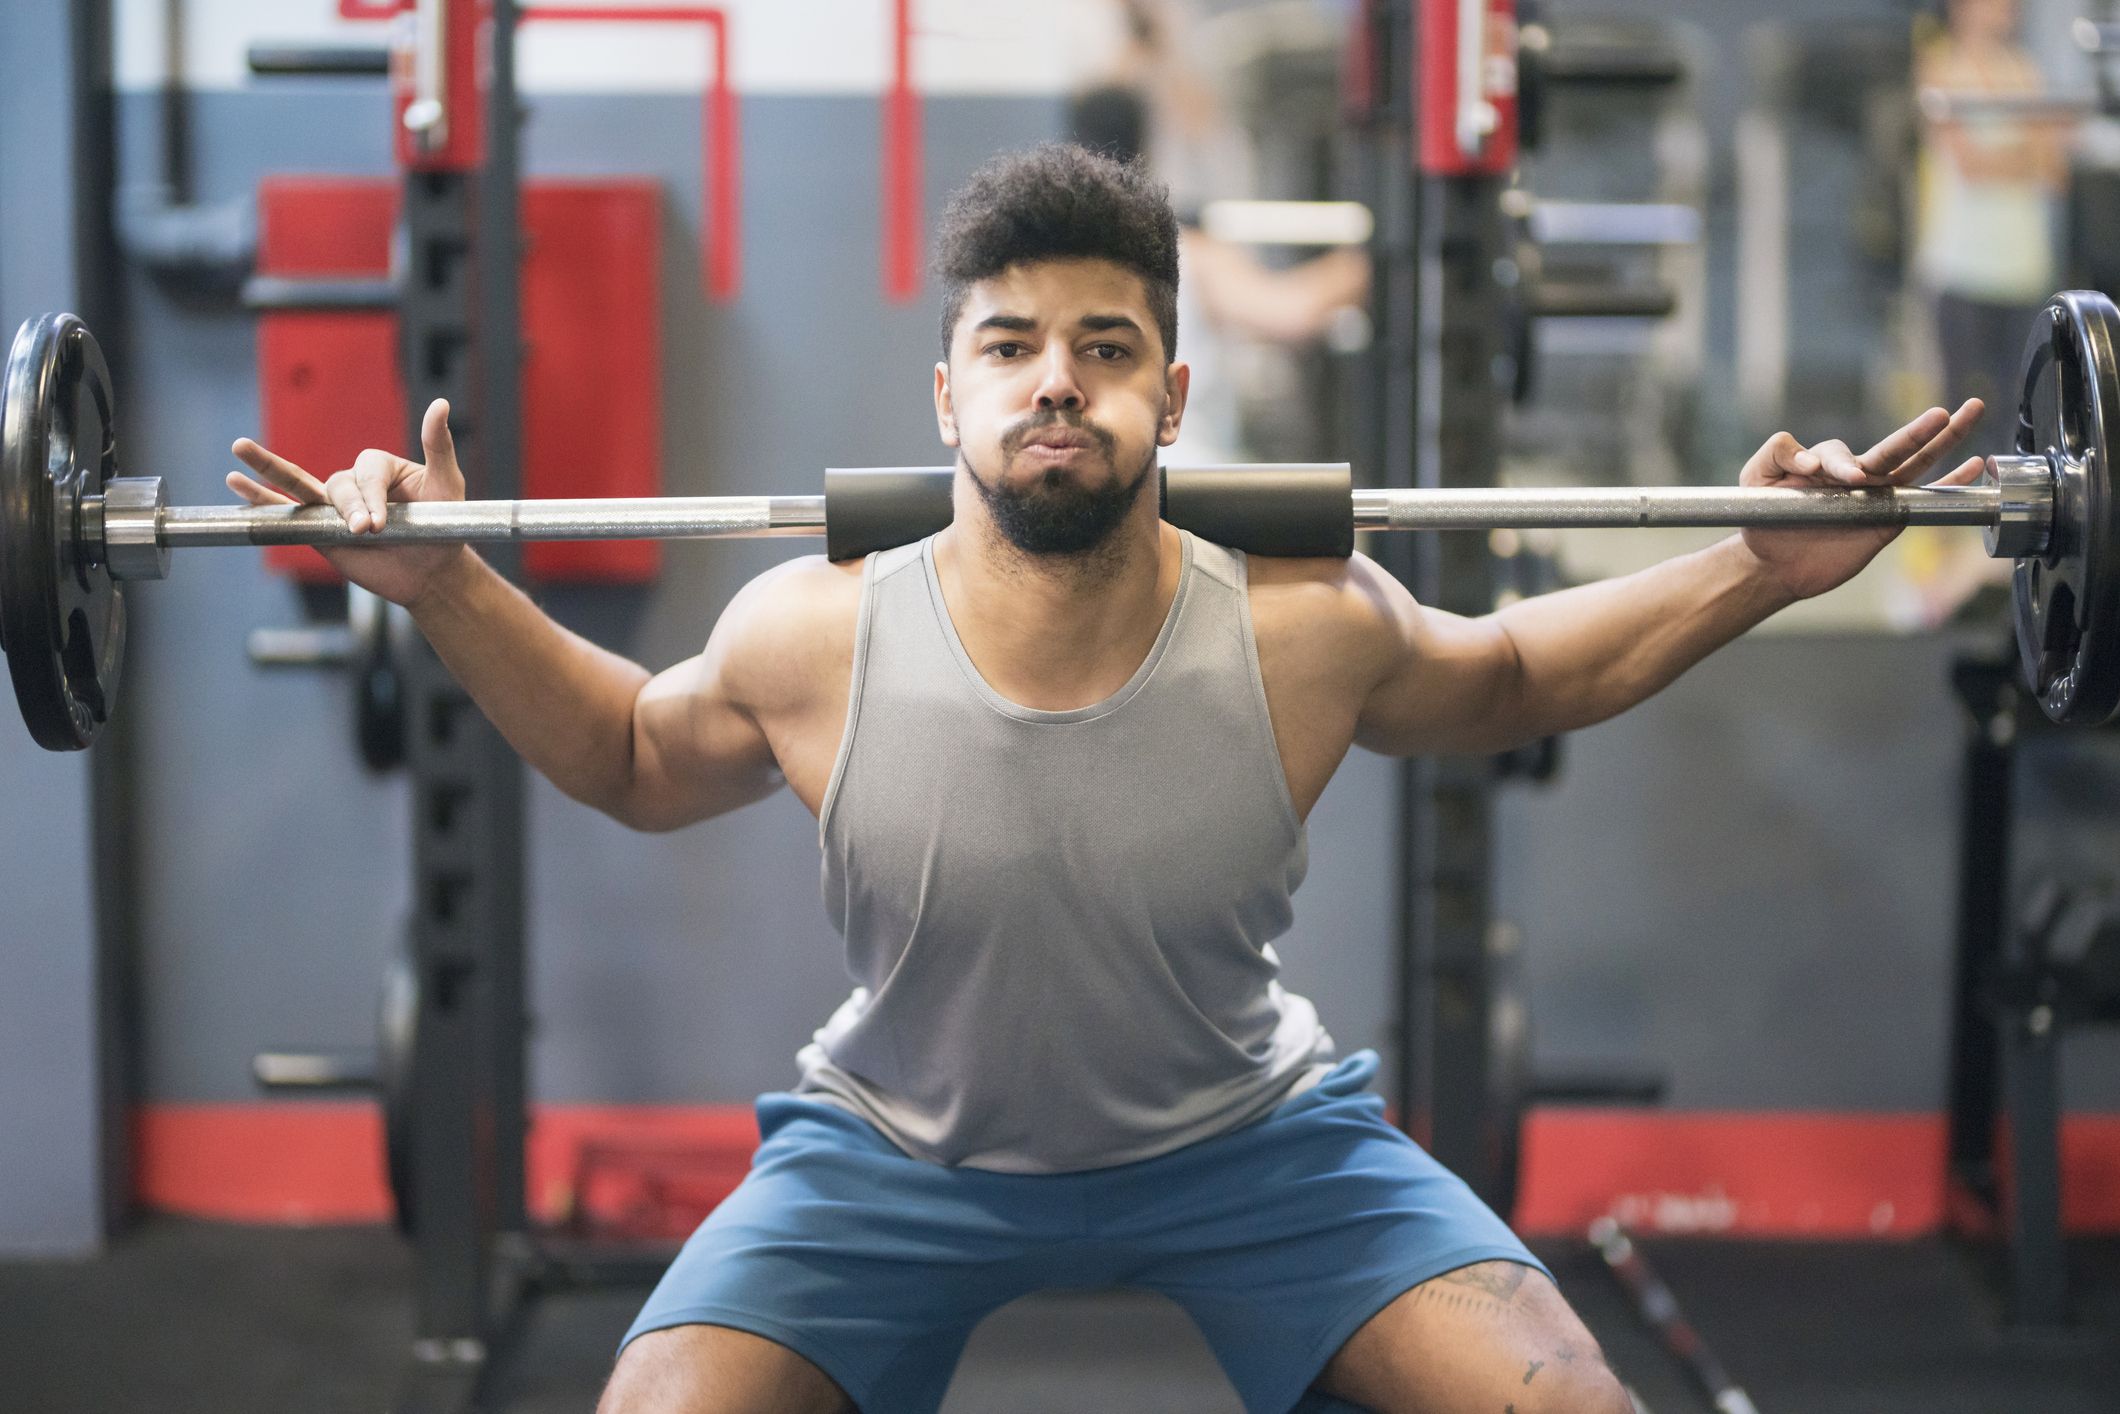 3 Heavy Barbell Back Squat Alternative Exercises for Workouts